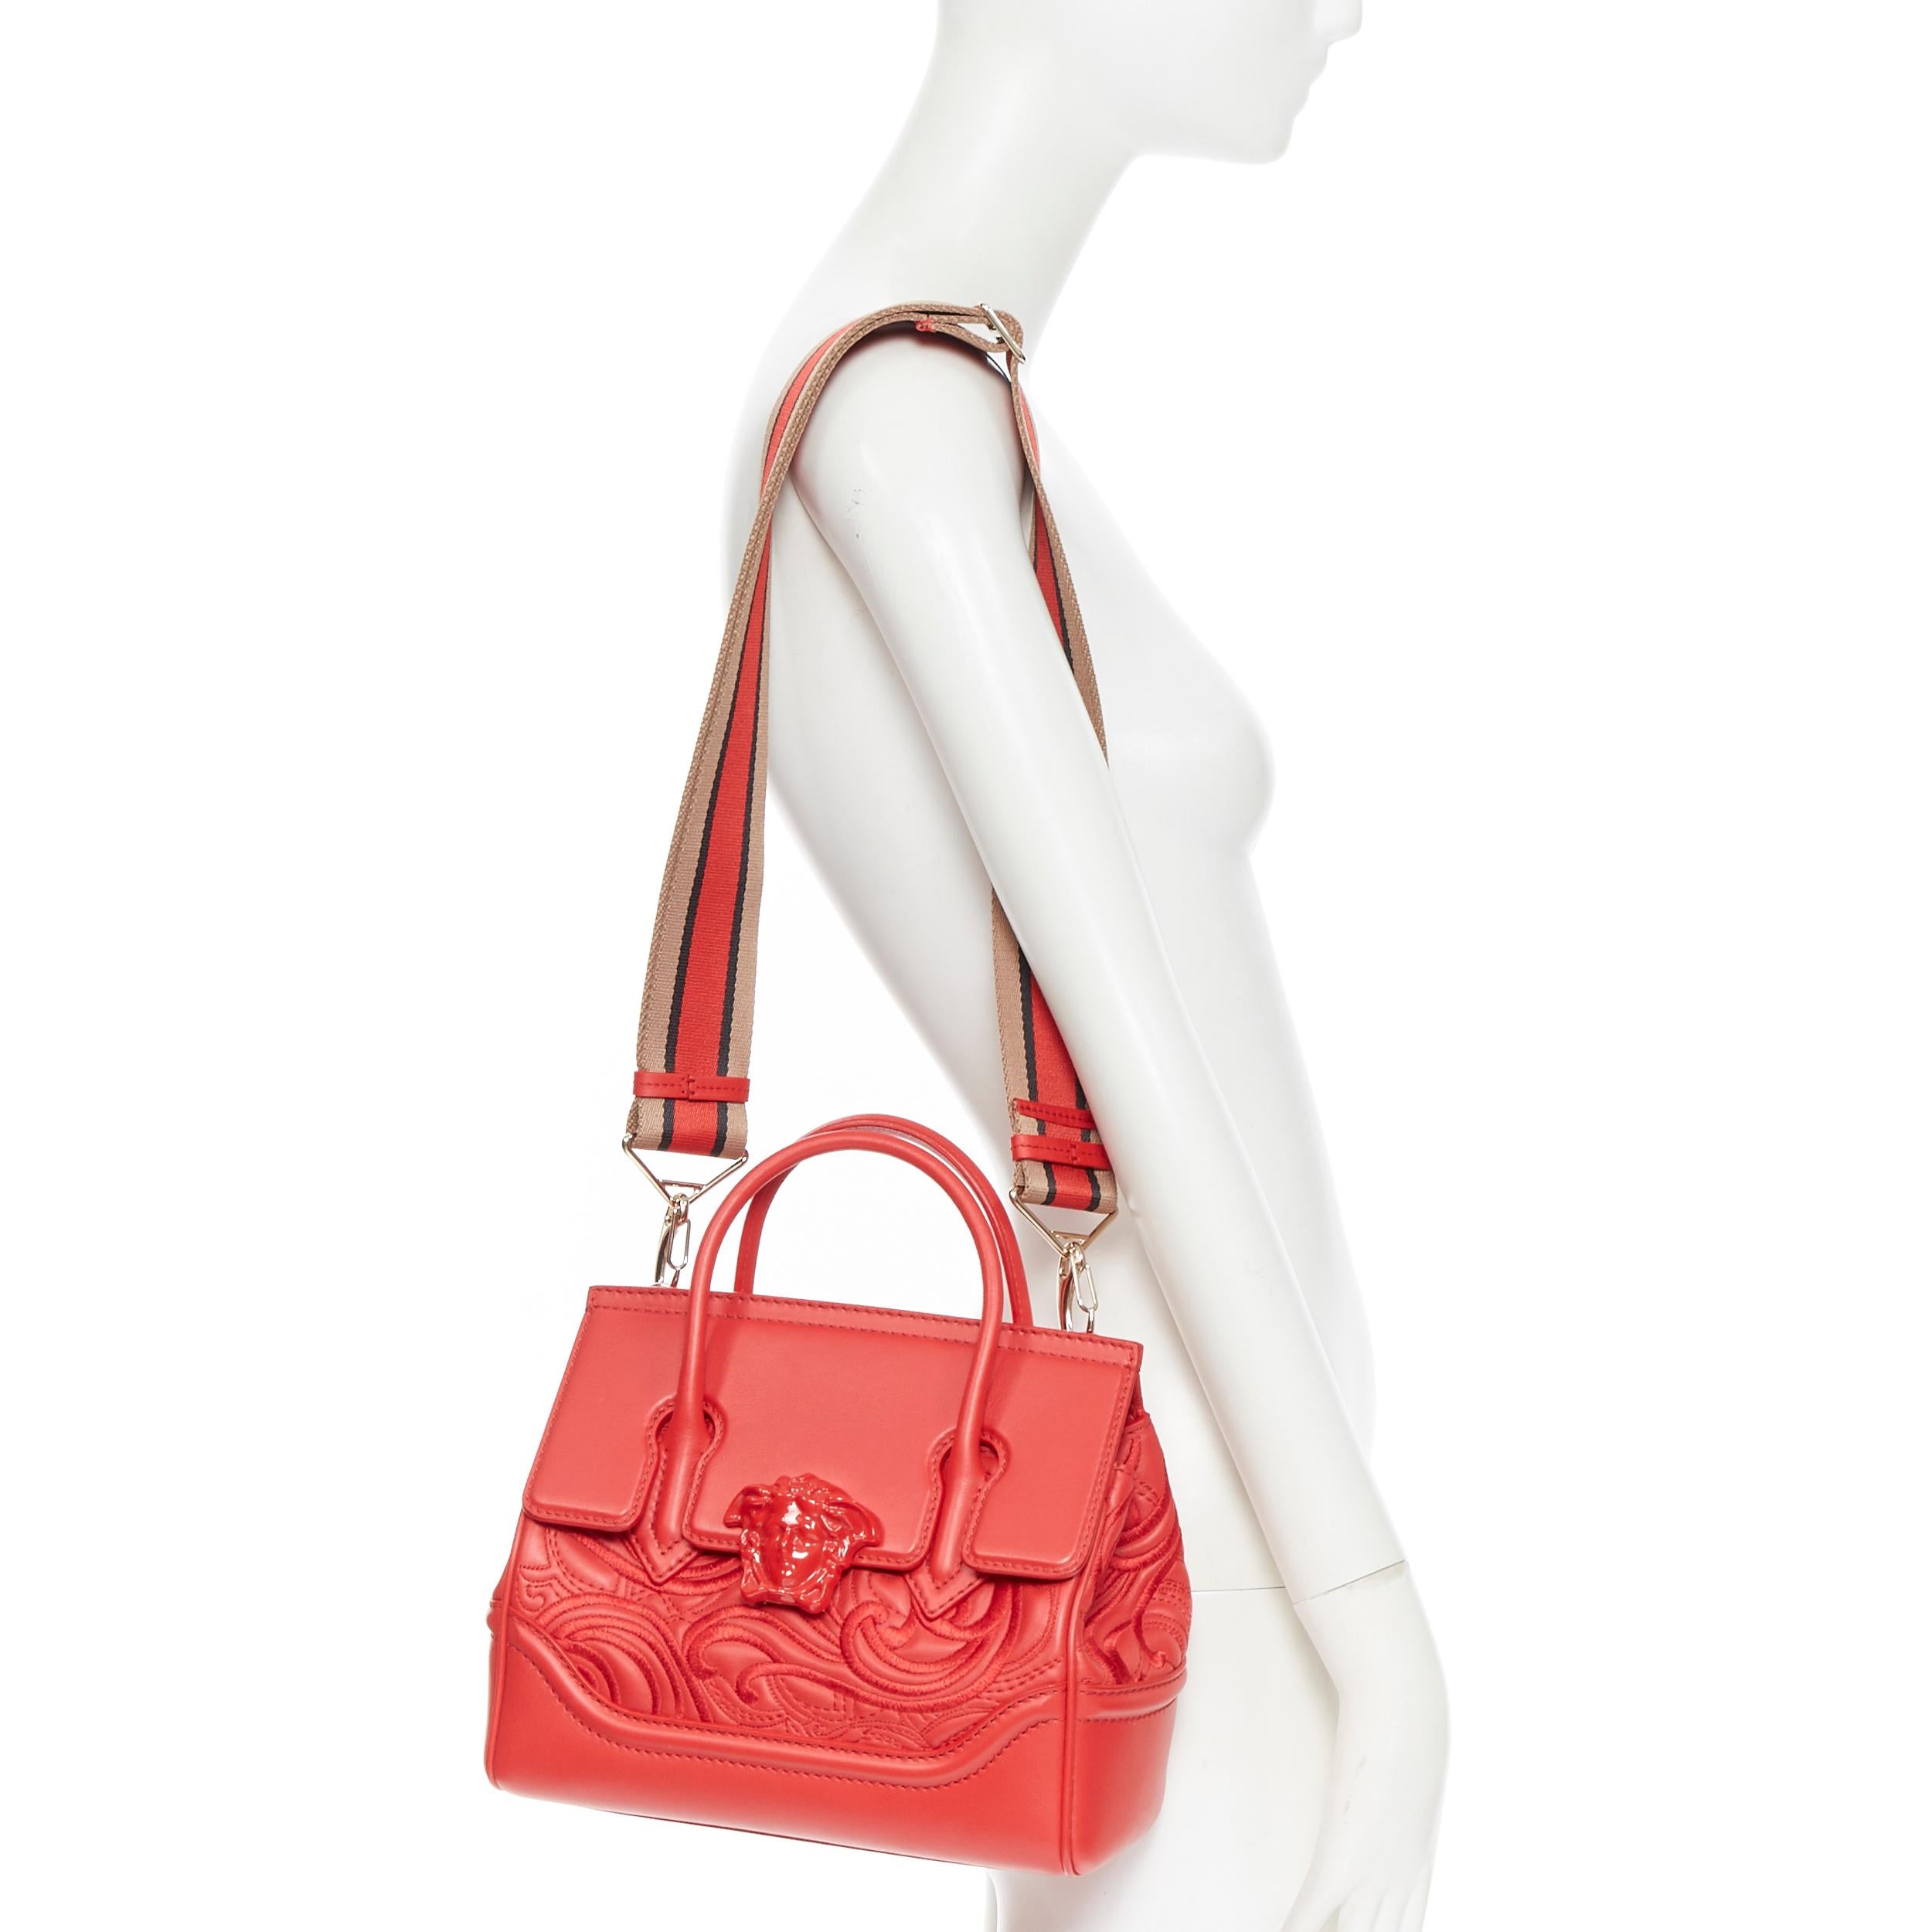 new VERSACE Palazzo Empire Small Baroque Embroidered red Medusa satchel bag 
Brand: Versace
Designer: Donatella Versace
Collection: 2019
Model Name / Style: Palazzo Empire
Material: Leather
Color: Red
Pattern: Floral
Closure: Clasp
Lining material: